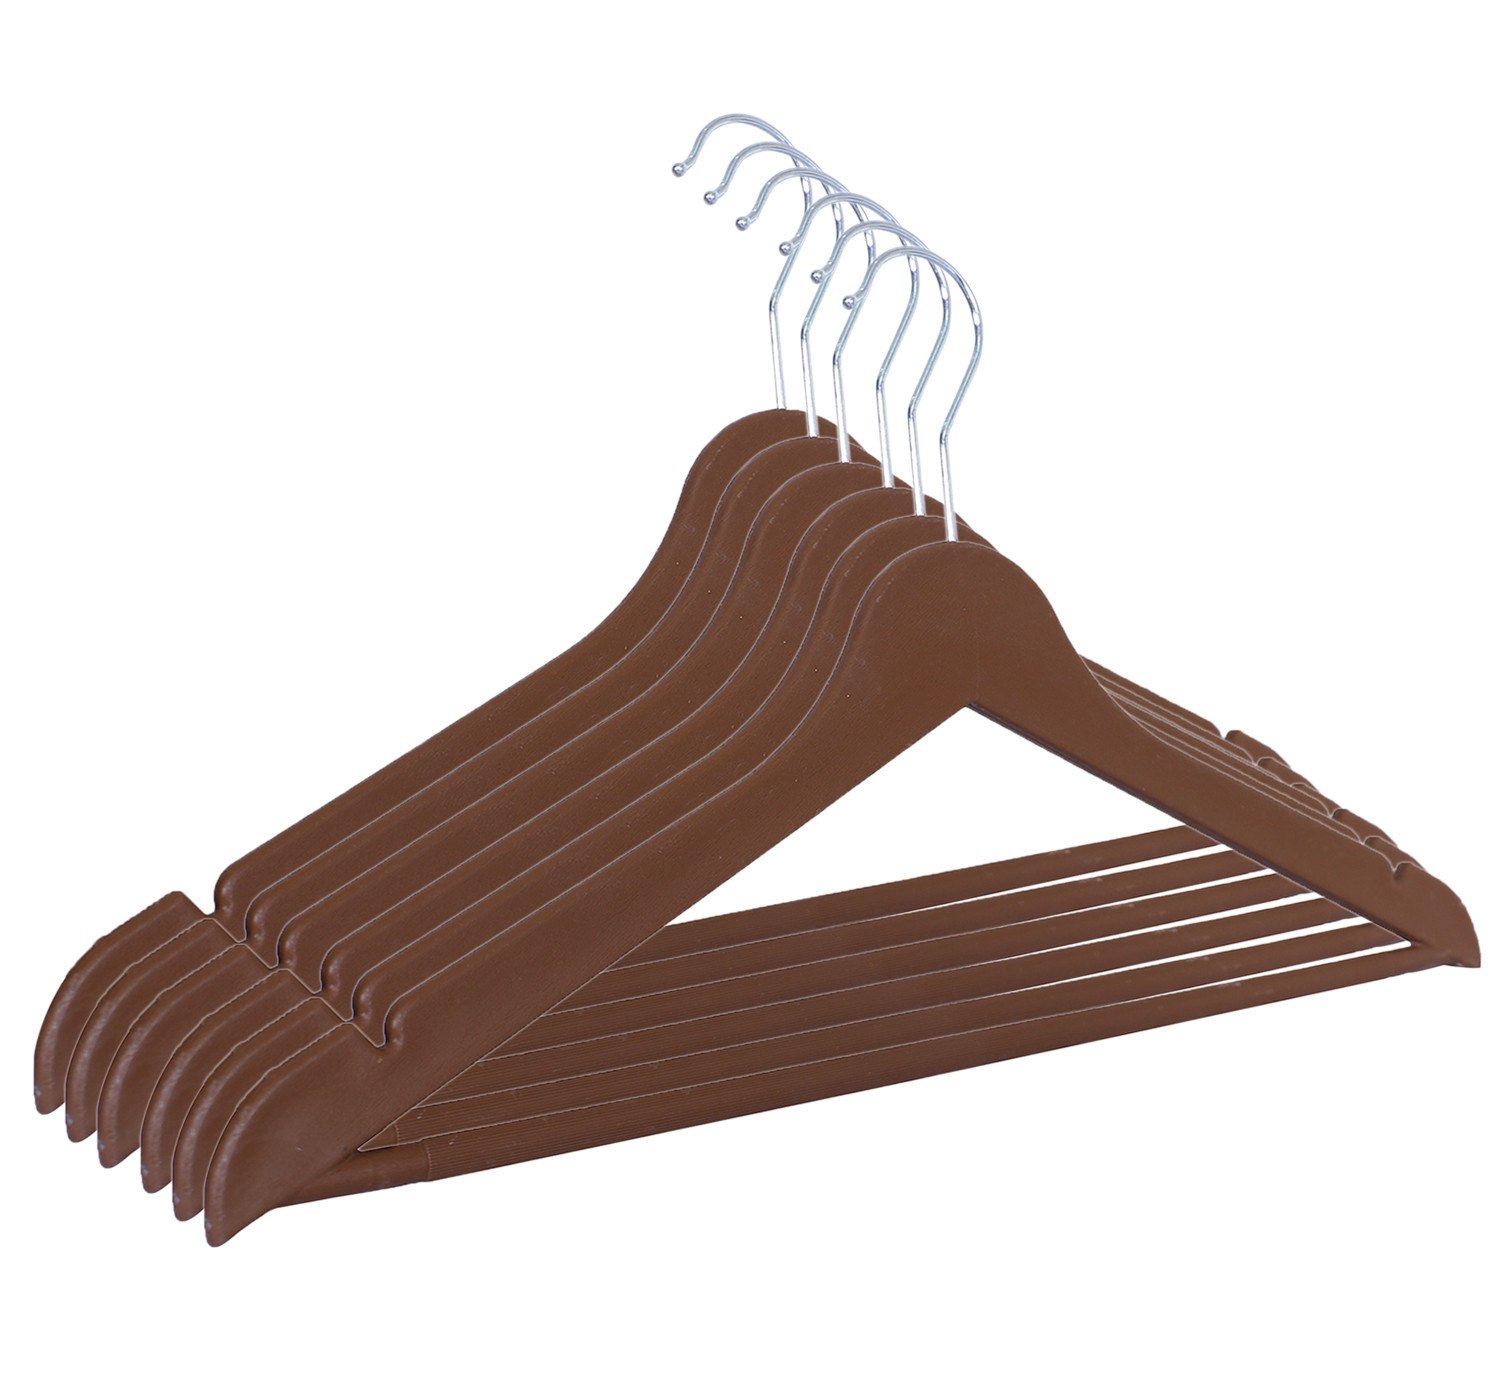 Kuber Industries Hanger|Durable & Lightweight Coat and Clothes Hangers|Notches Wardrobe Organization With 360 Degree Swivel Hook|(Brown)